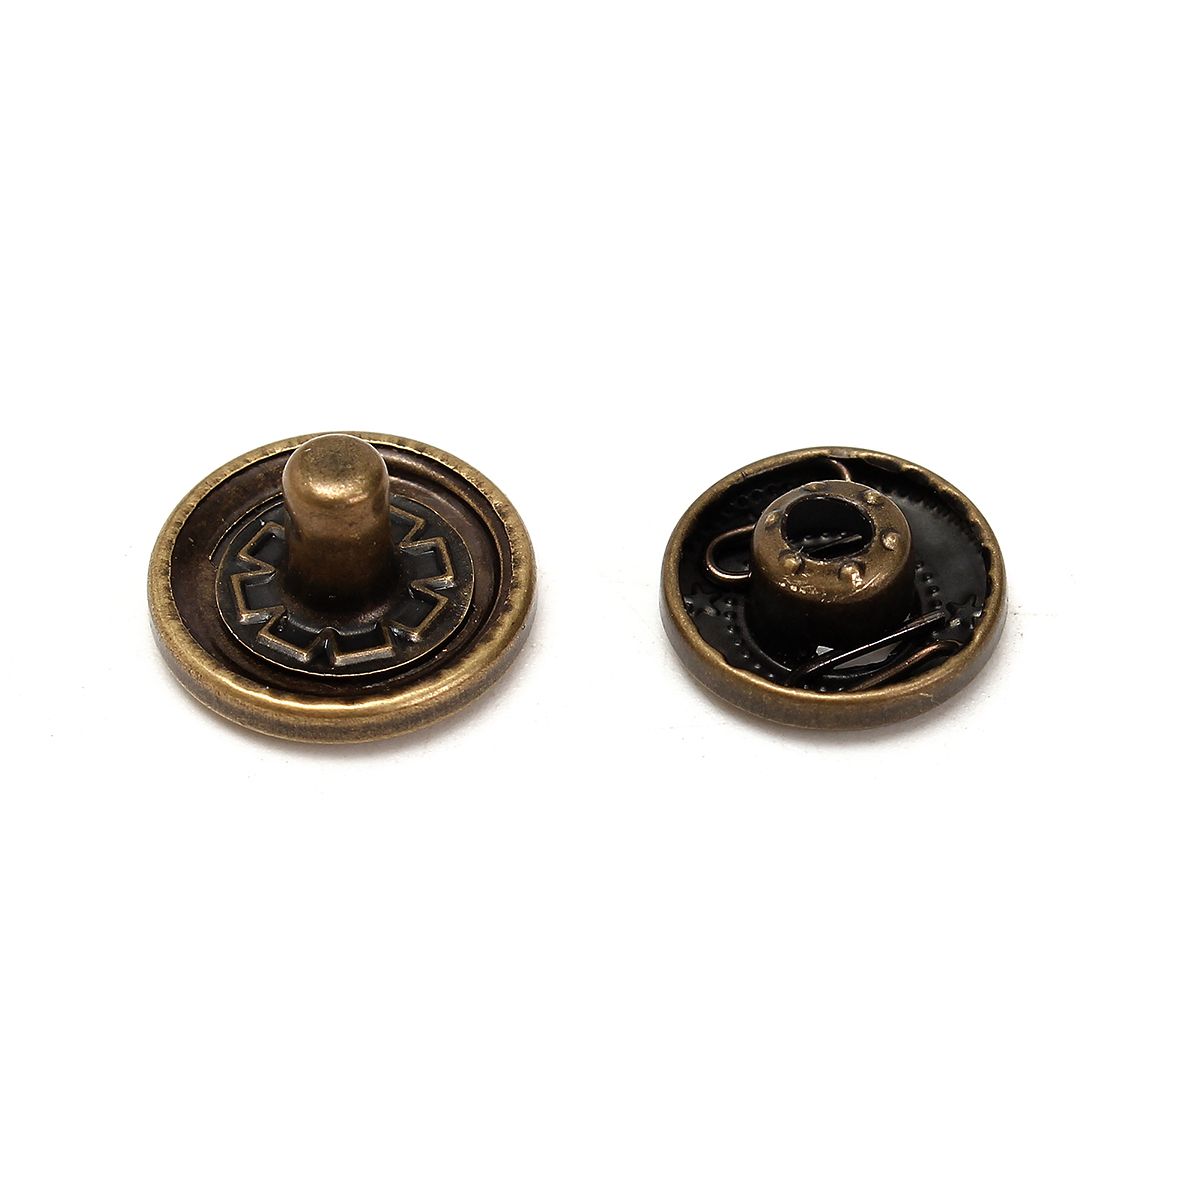 30Set-15mm-Antique-Brass-Snap-Fasteners-Popper-Press-Stud-Button-Leather-Tool-Kit-1253986